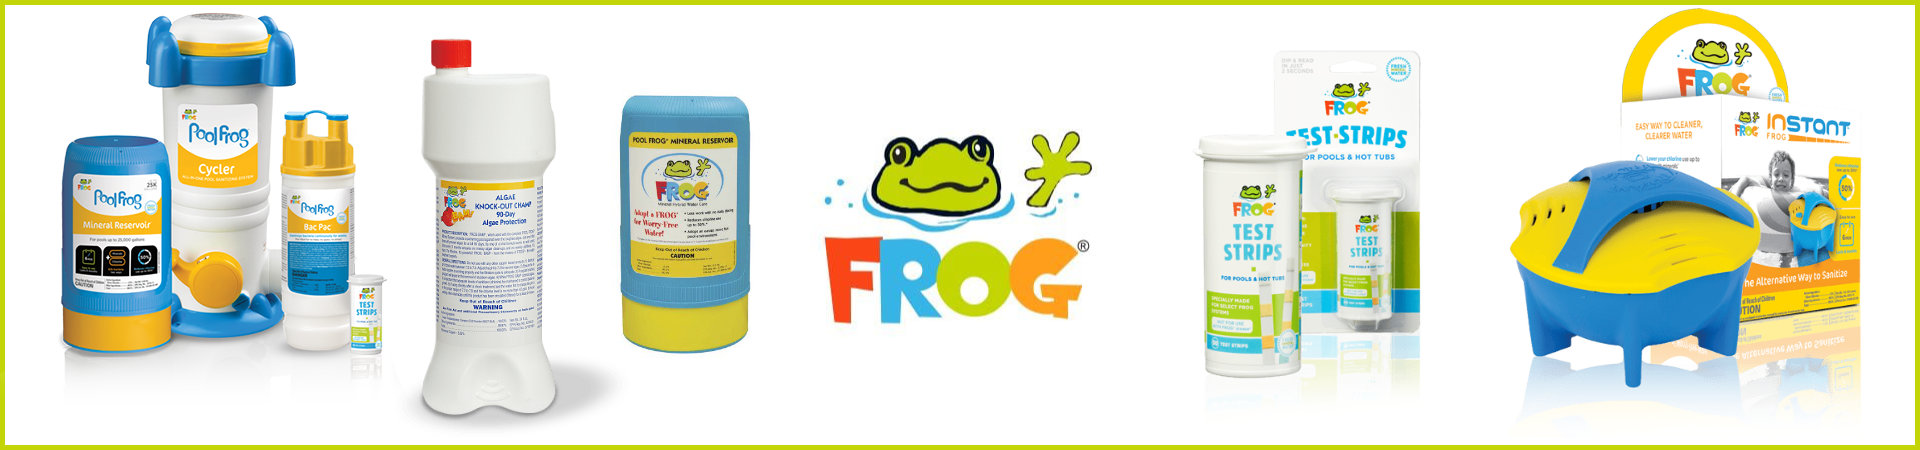 FROG Products